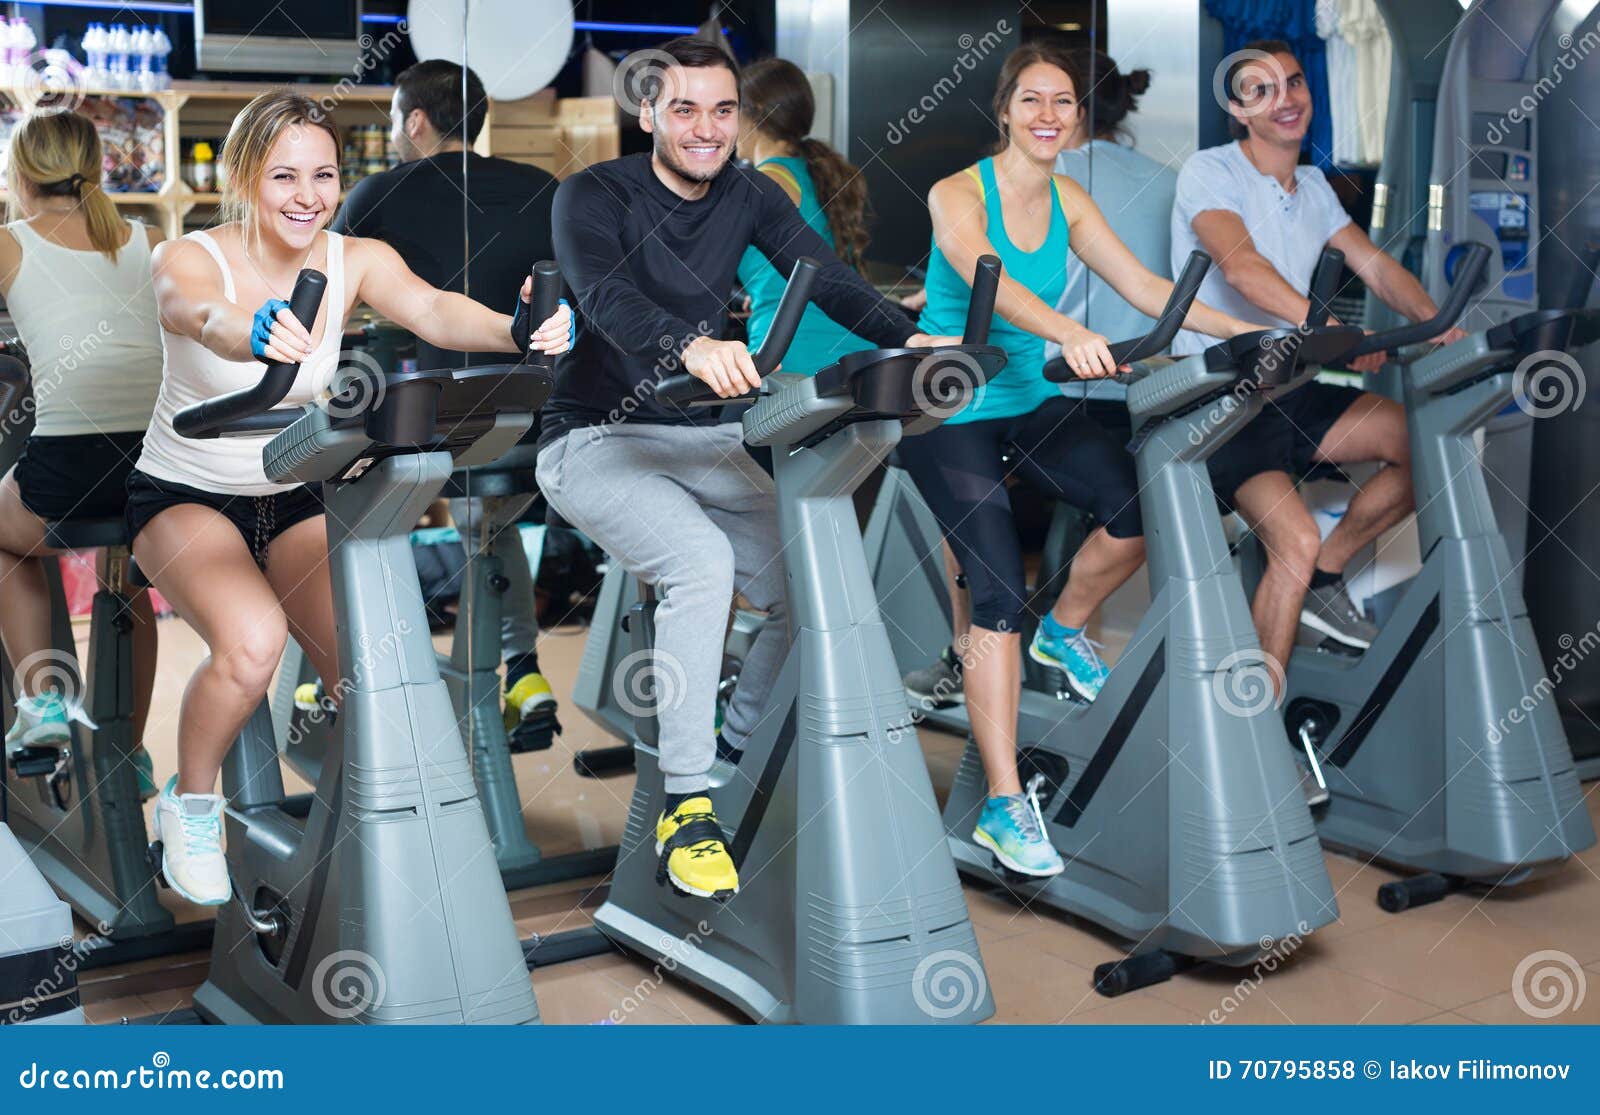 indoor group cycling